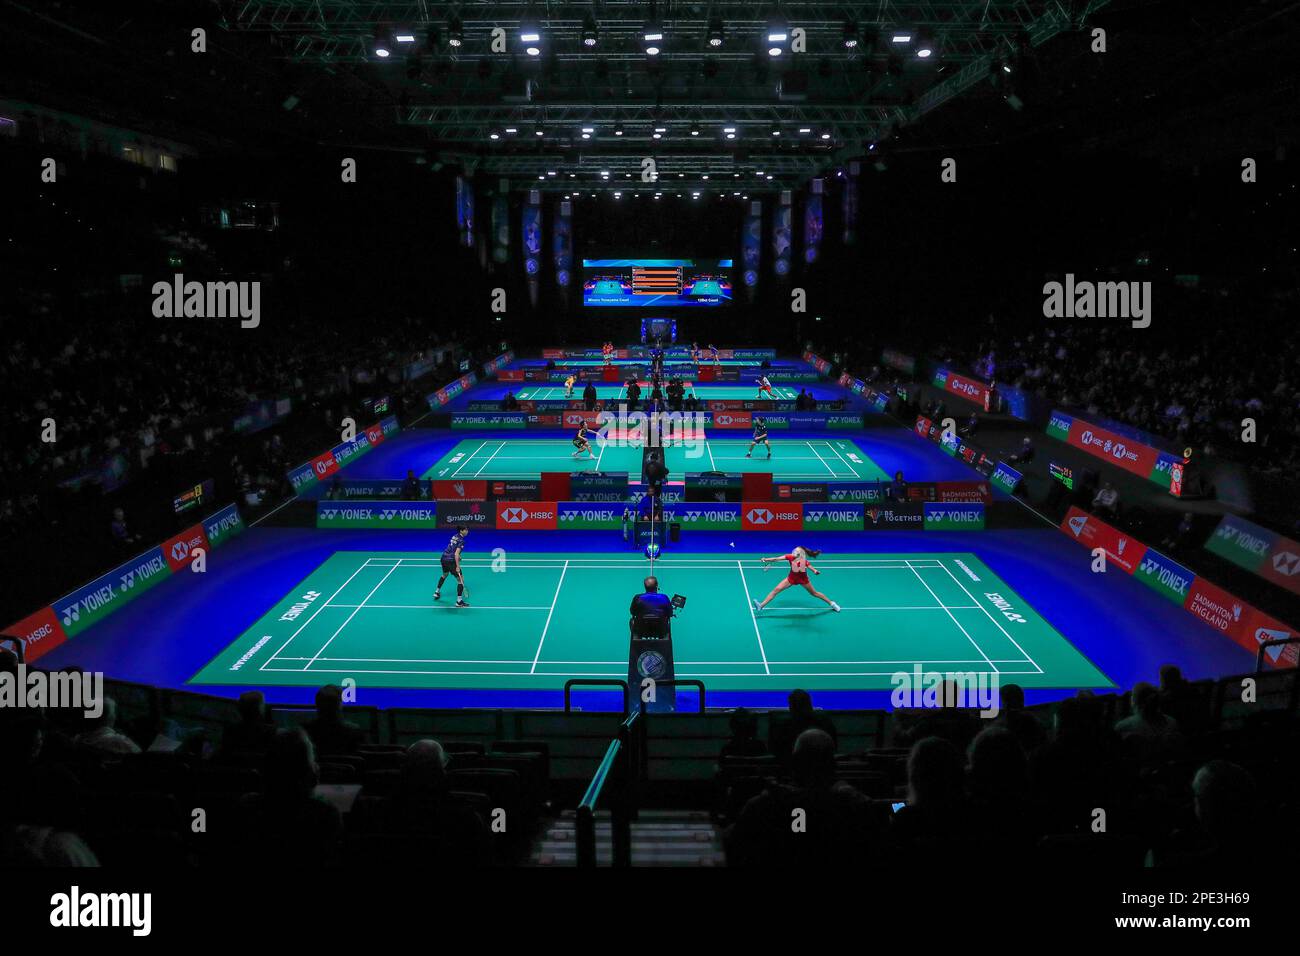 A general view of play on day two of the YONEX All England Open Badminton Championships at the Utilita Arena Birmingham